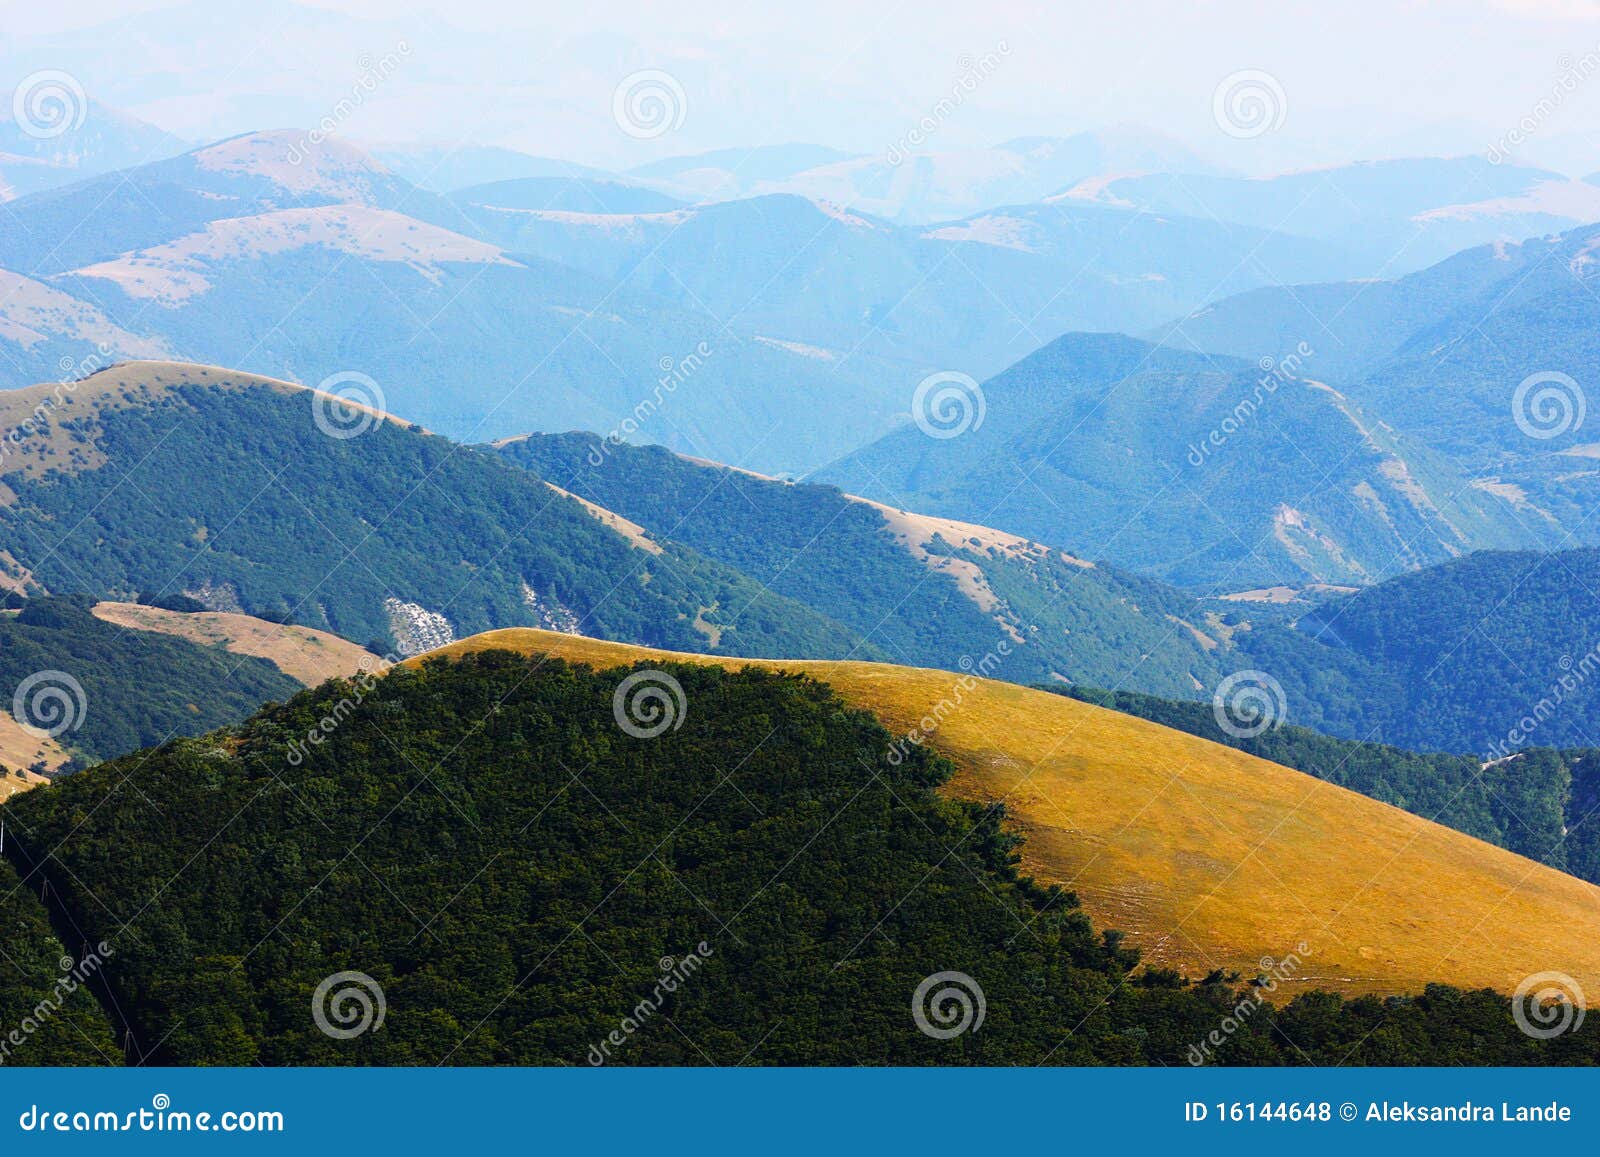 beautiful landscapes of the apennines